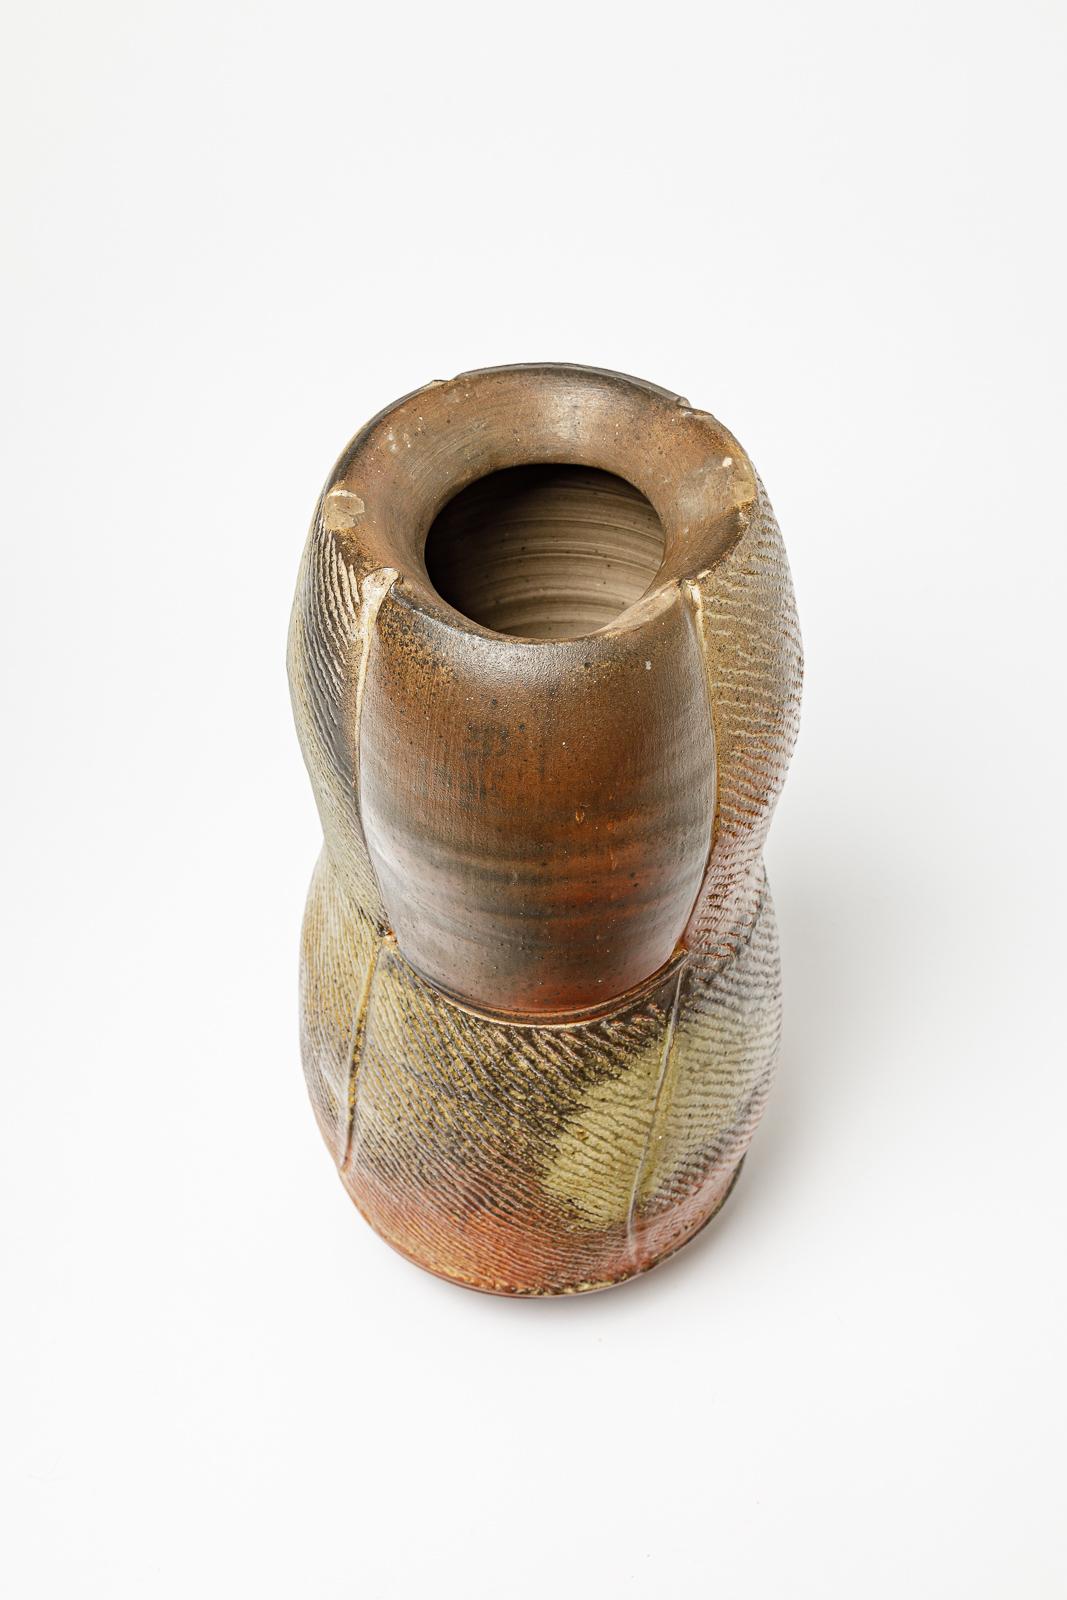 20th Century Woodfired ceramic vase by Eric Astoul, circa 1990. For Sale